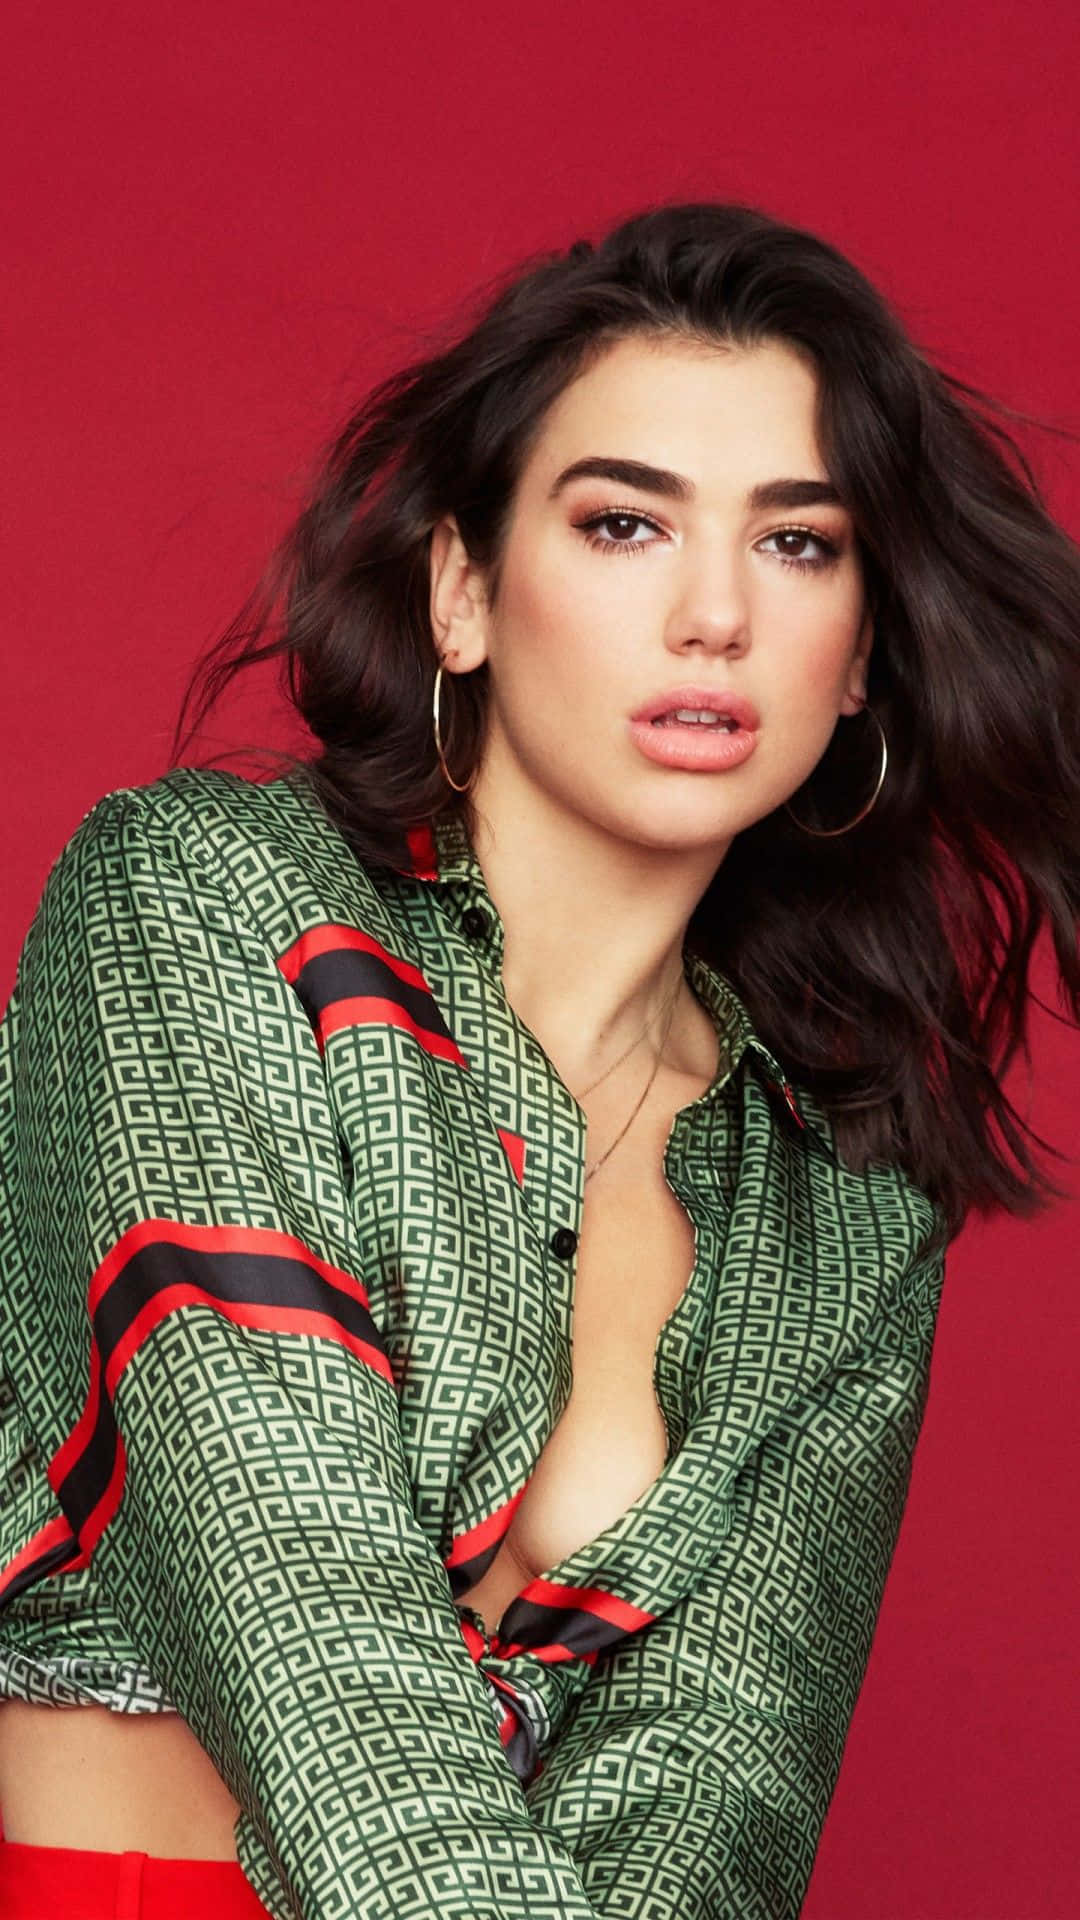 Singer and songwriter Dua Lipa performing live.